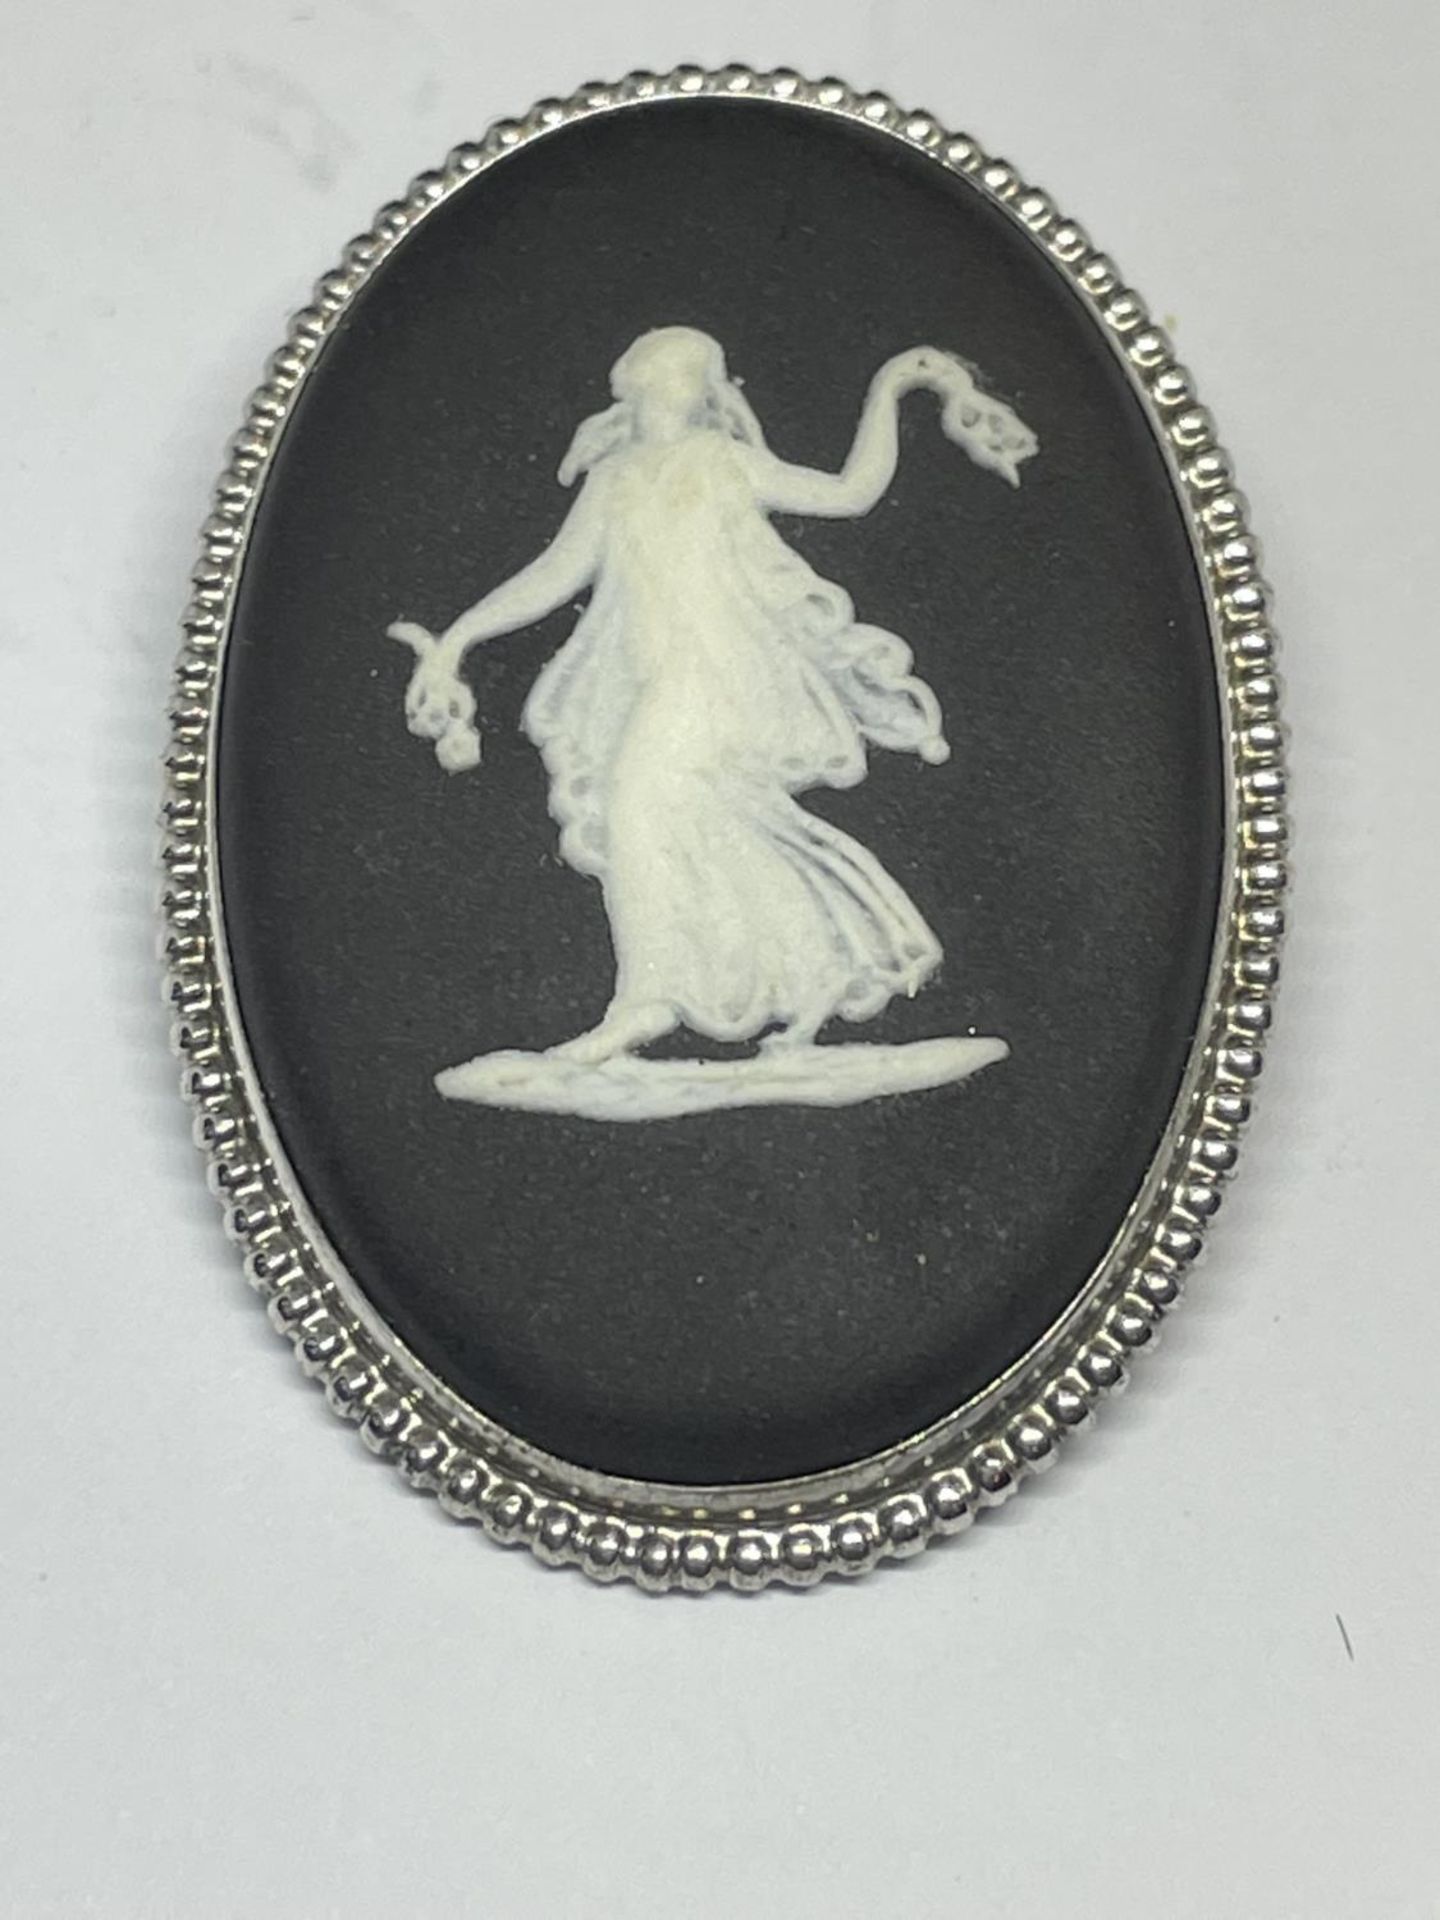 A SILVER MOUNTED BLACK WEDGWOOD JASPERWARE PLAQUE BROOCH IN A WEDGWOOD PRESENTATION BOX - Image 2 of 5